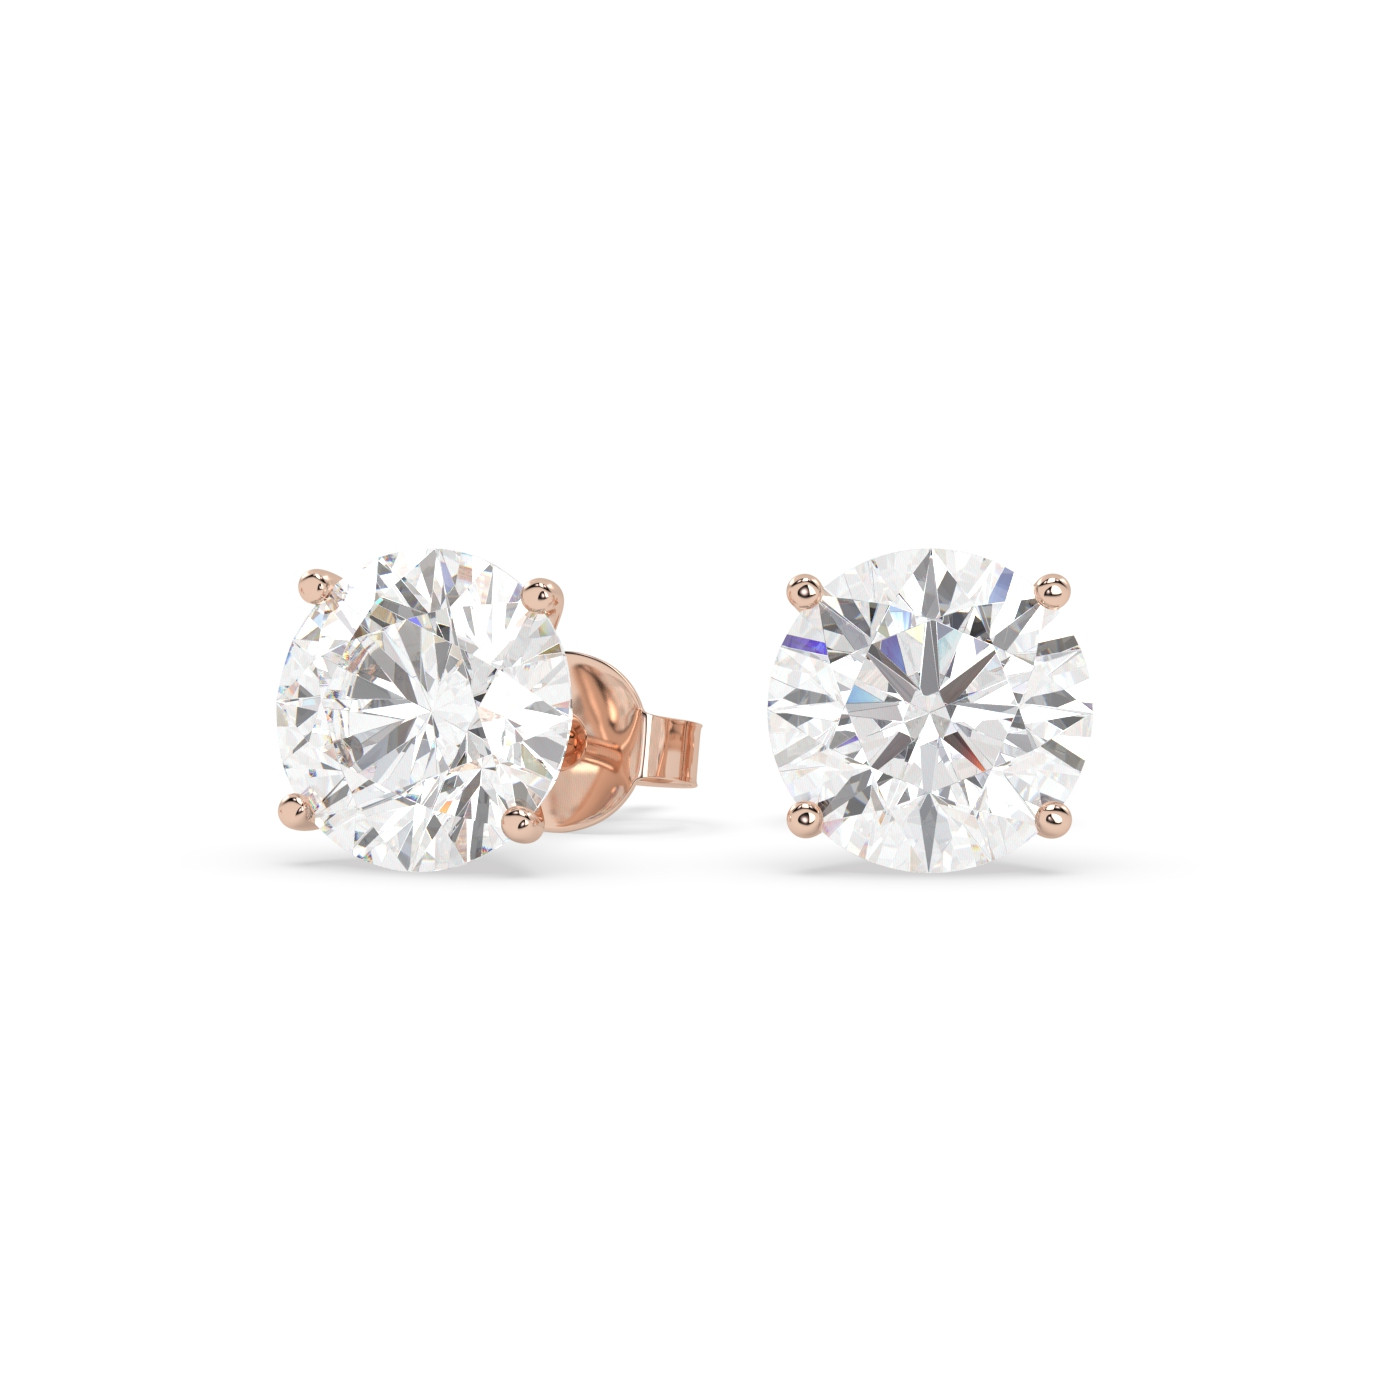 18k rose gold  1.4carat round stud earrings with butterfly back Photos & images